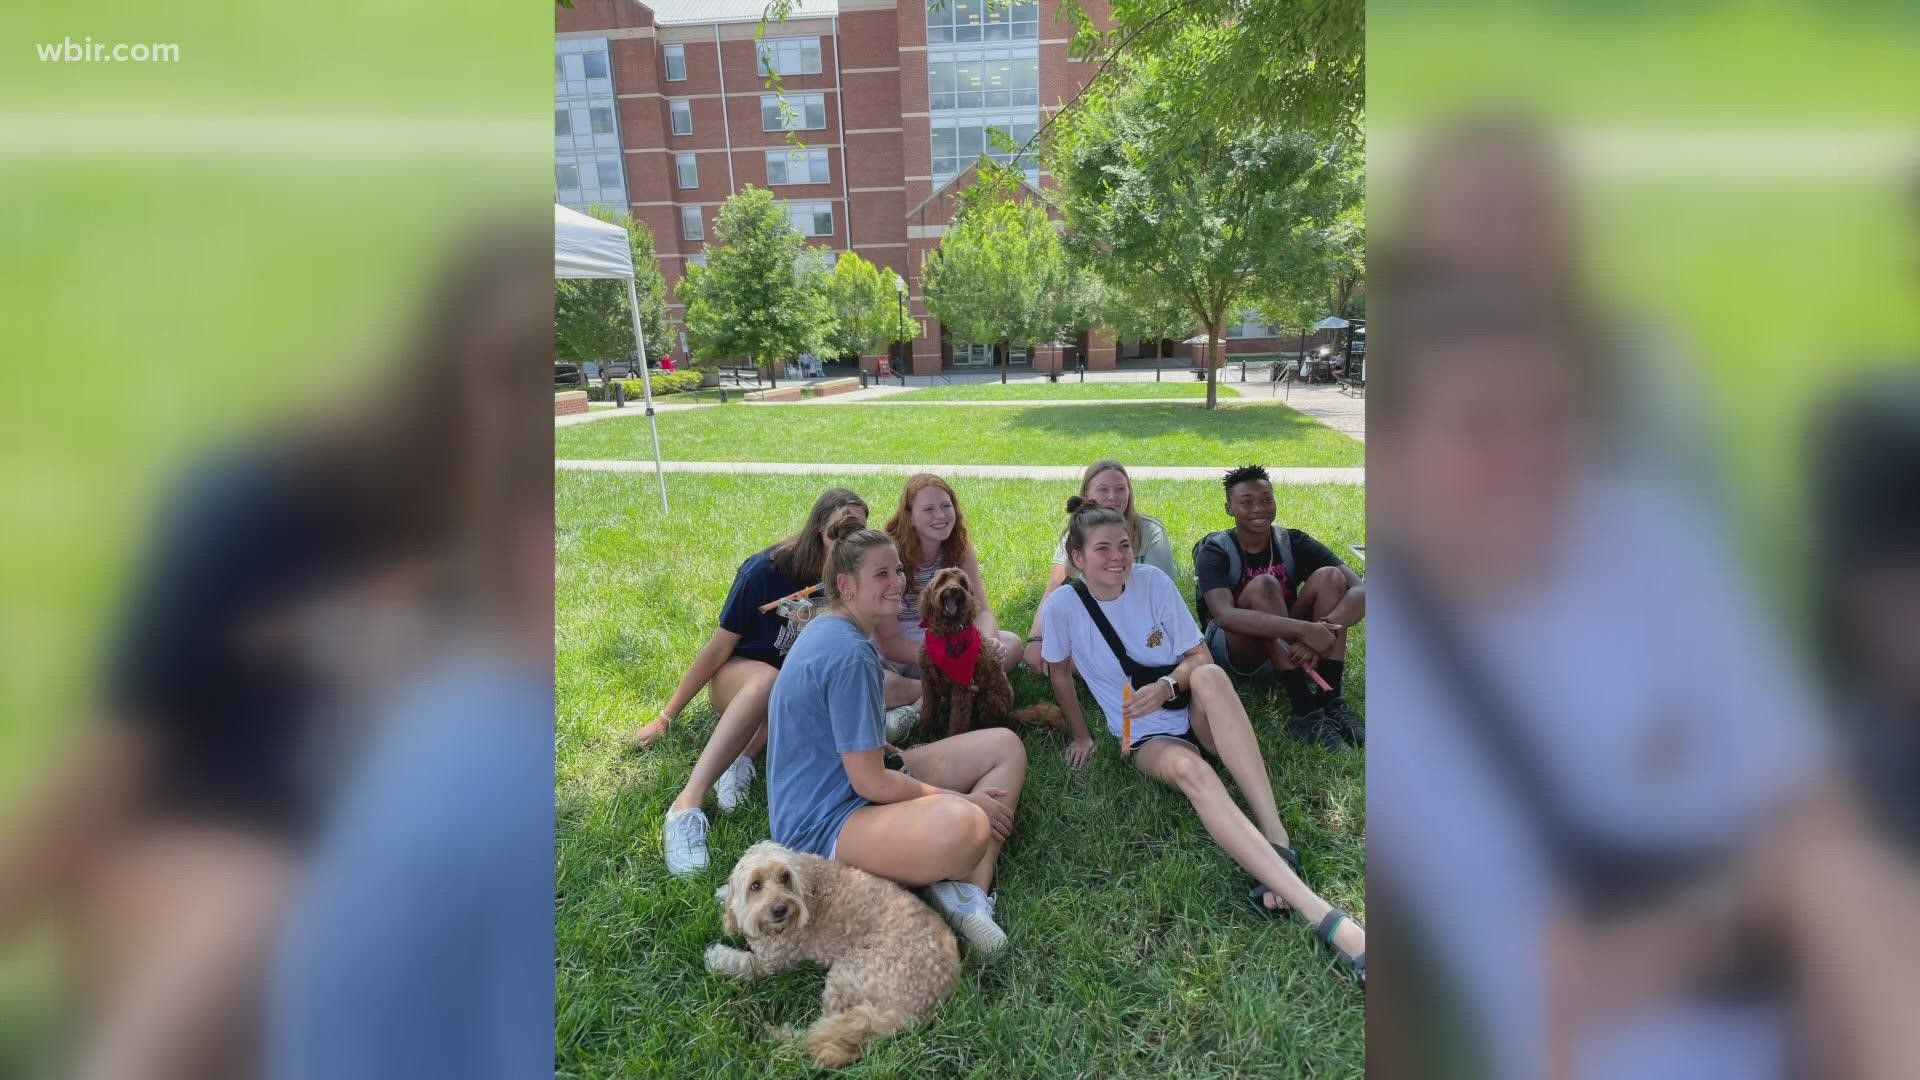 HABIT brings their therapy dogs to UT campus to help students feel more at home in the dorms. Aug. 16, 2021-4pm.